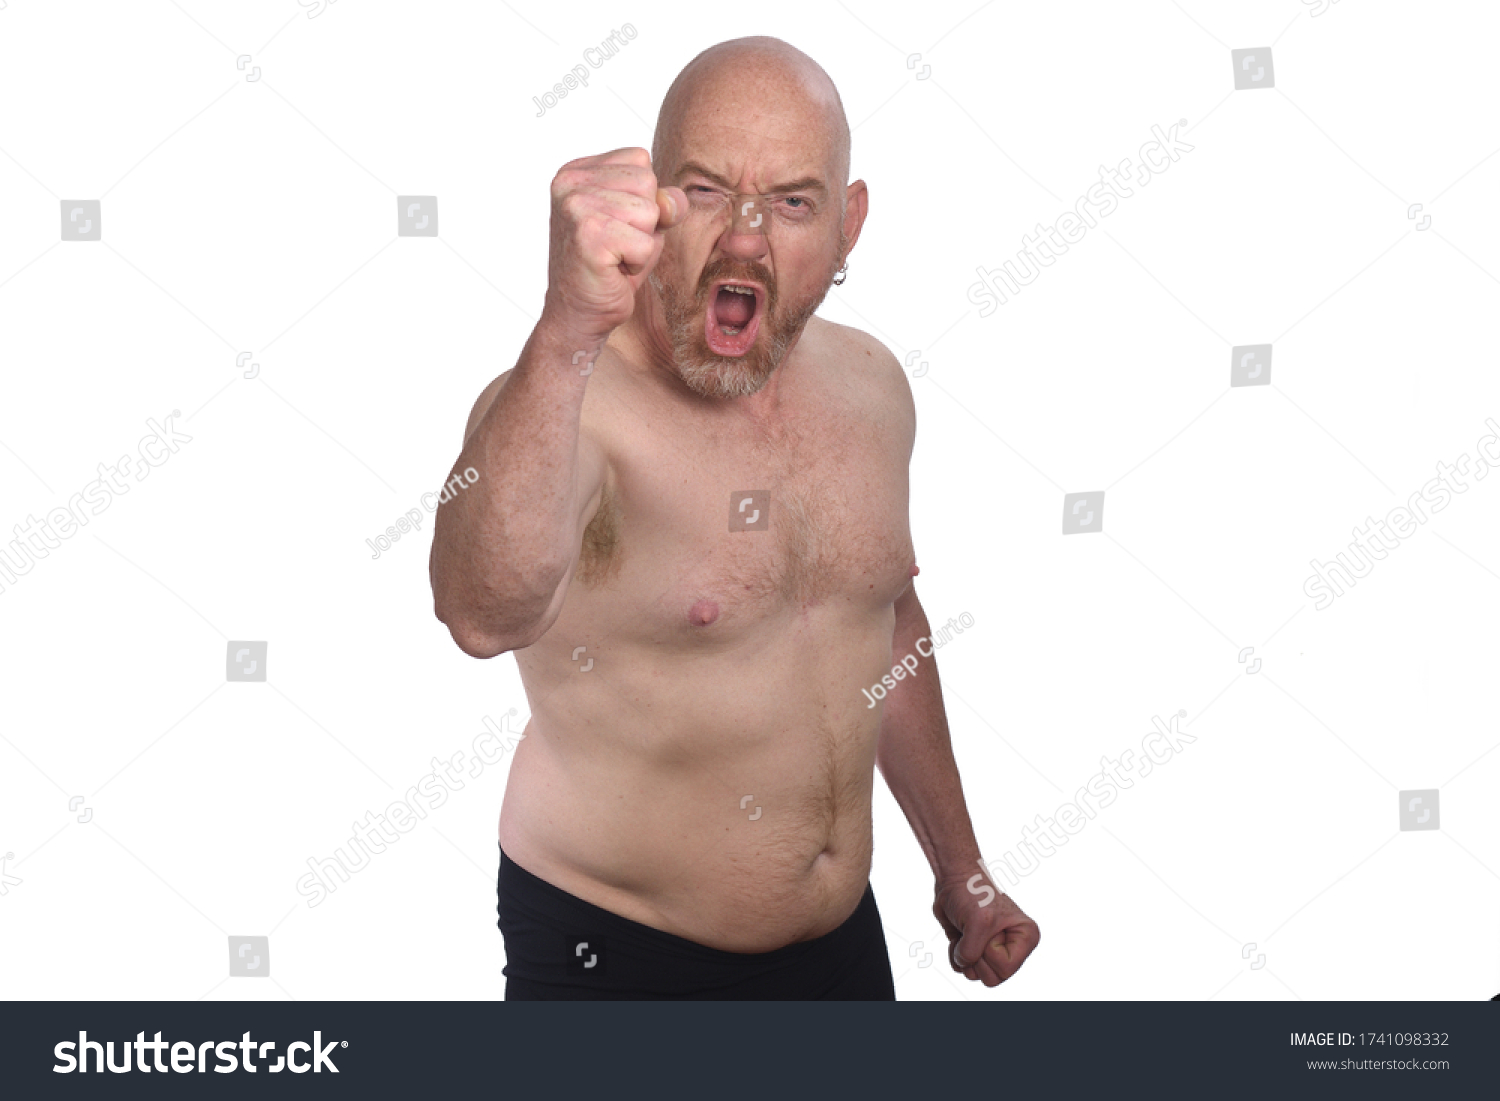 Shirtless Angry Man On White Background Stock Photo Shutterstock